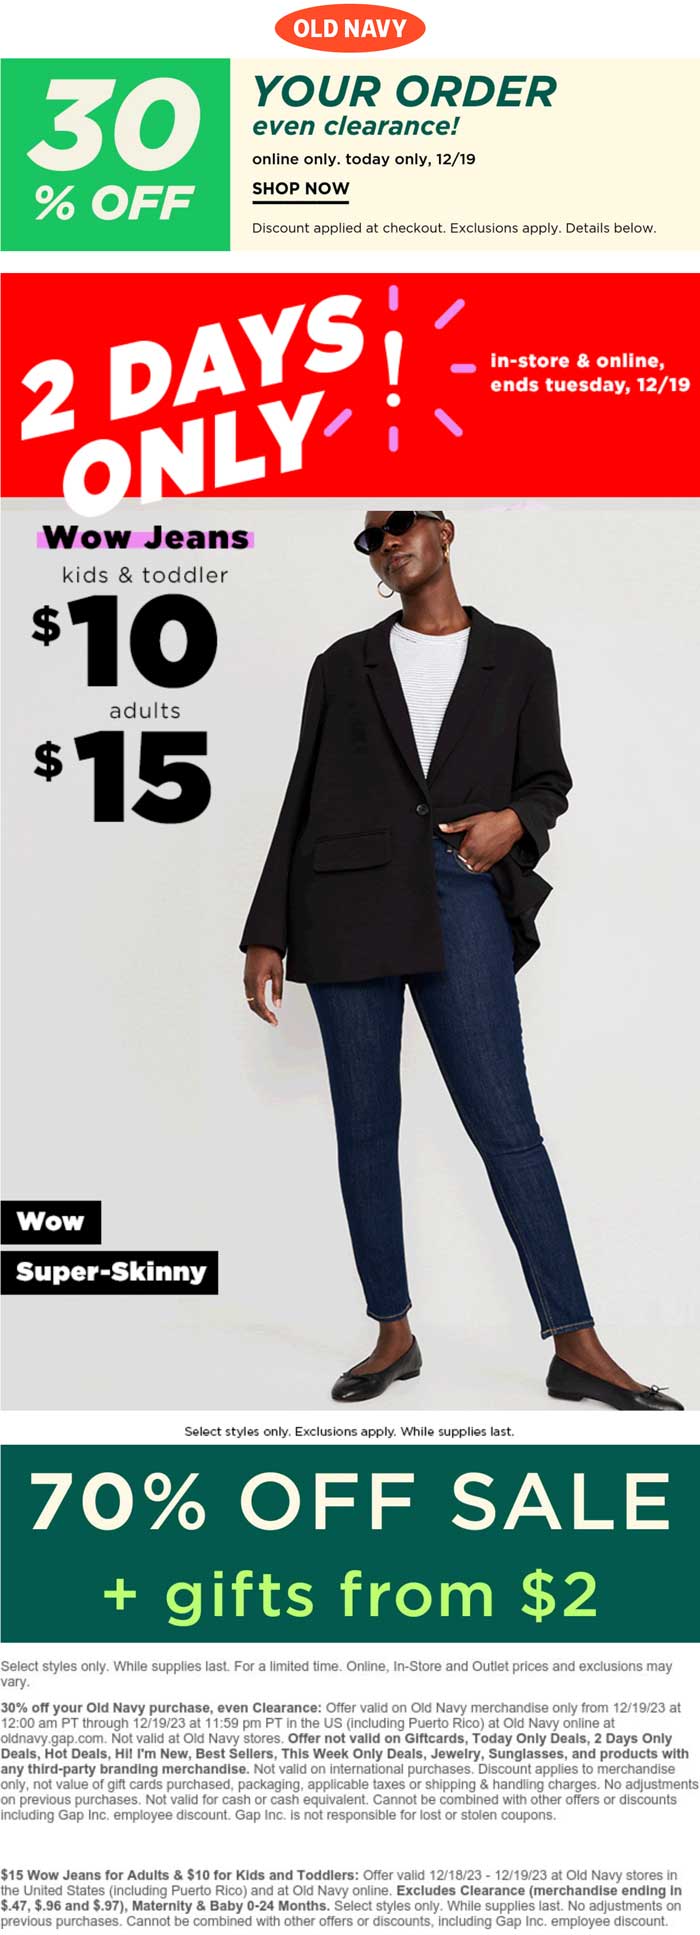 $15 jeans today also 30% off online at Old Navy #oldnavy